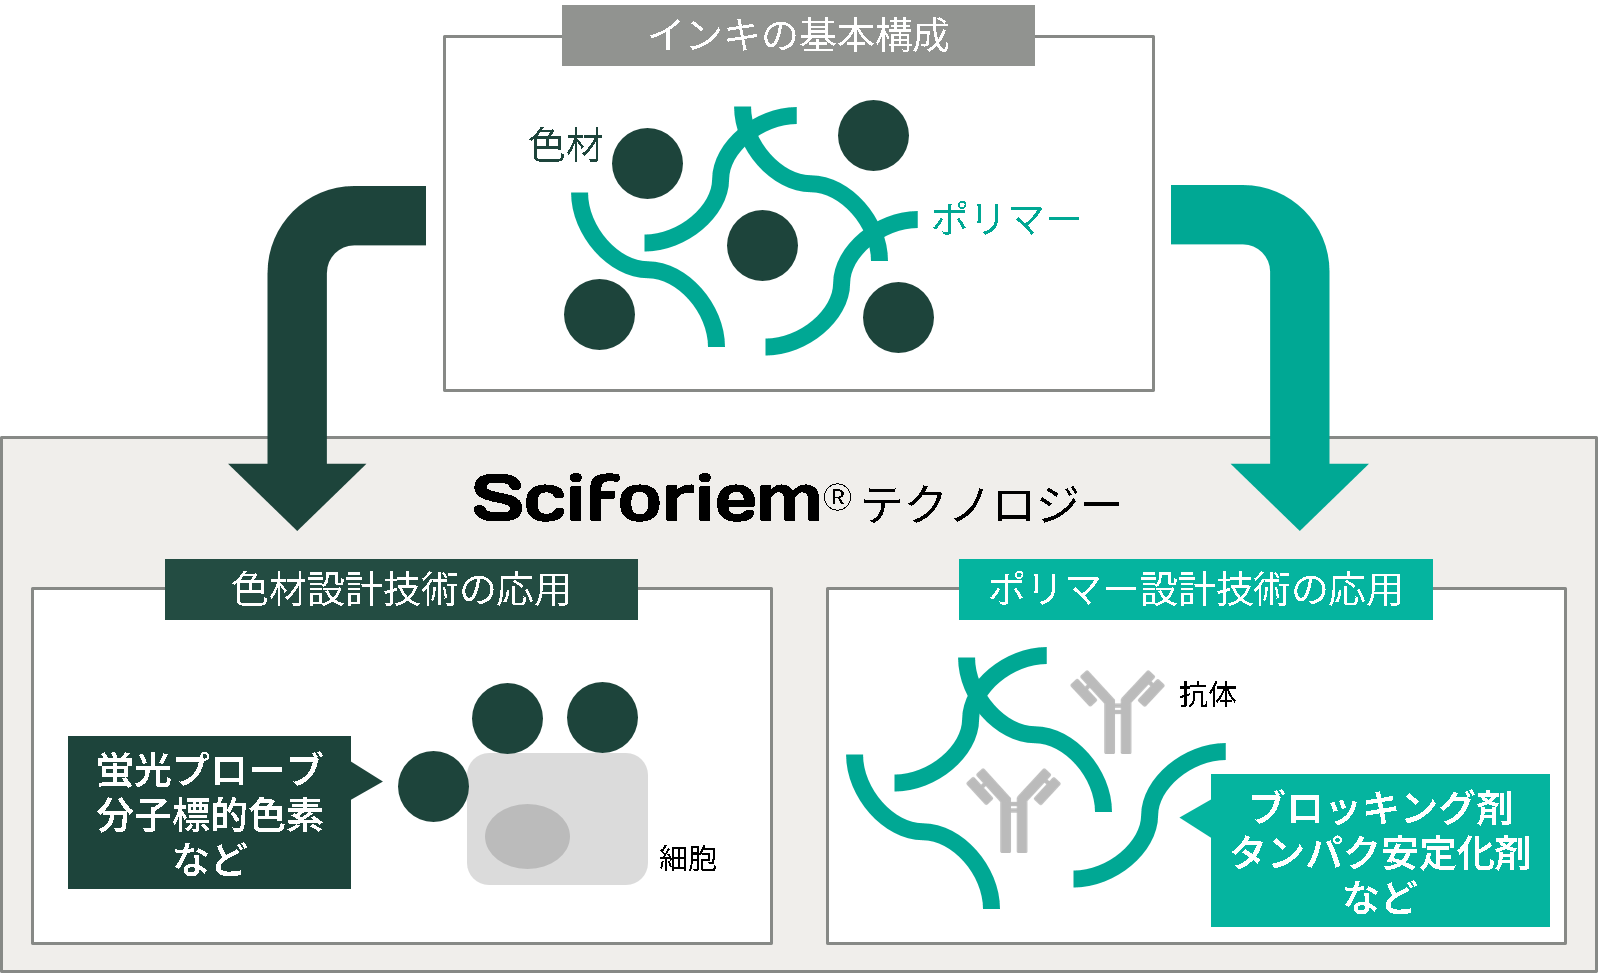 Sciforiem ™ Technology that applies material design technologies such as colorants and polymers to the field of bioscience